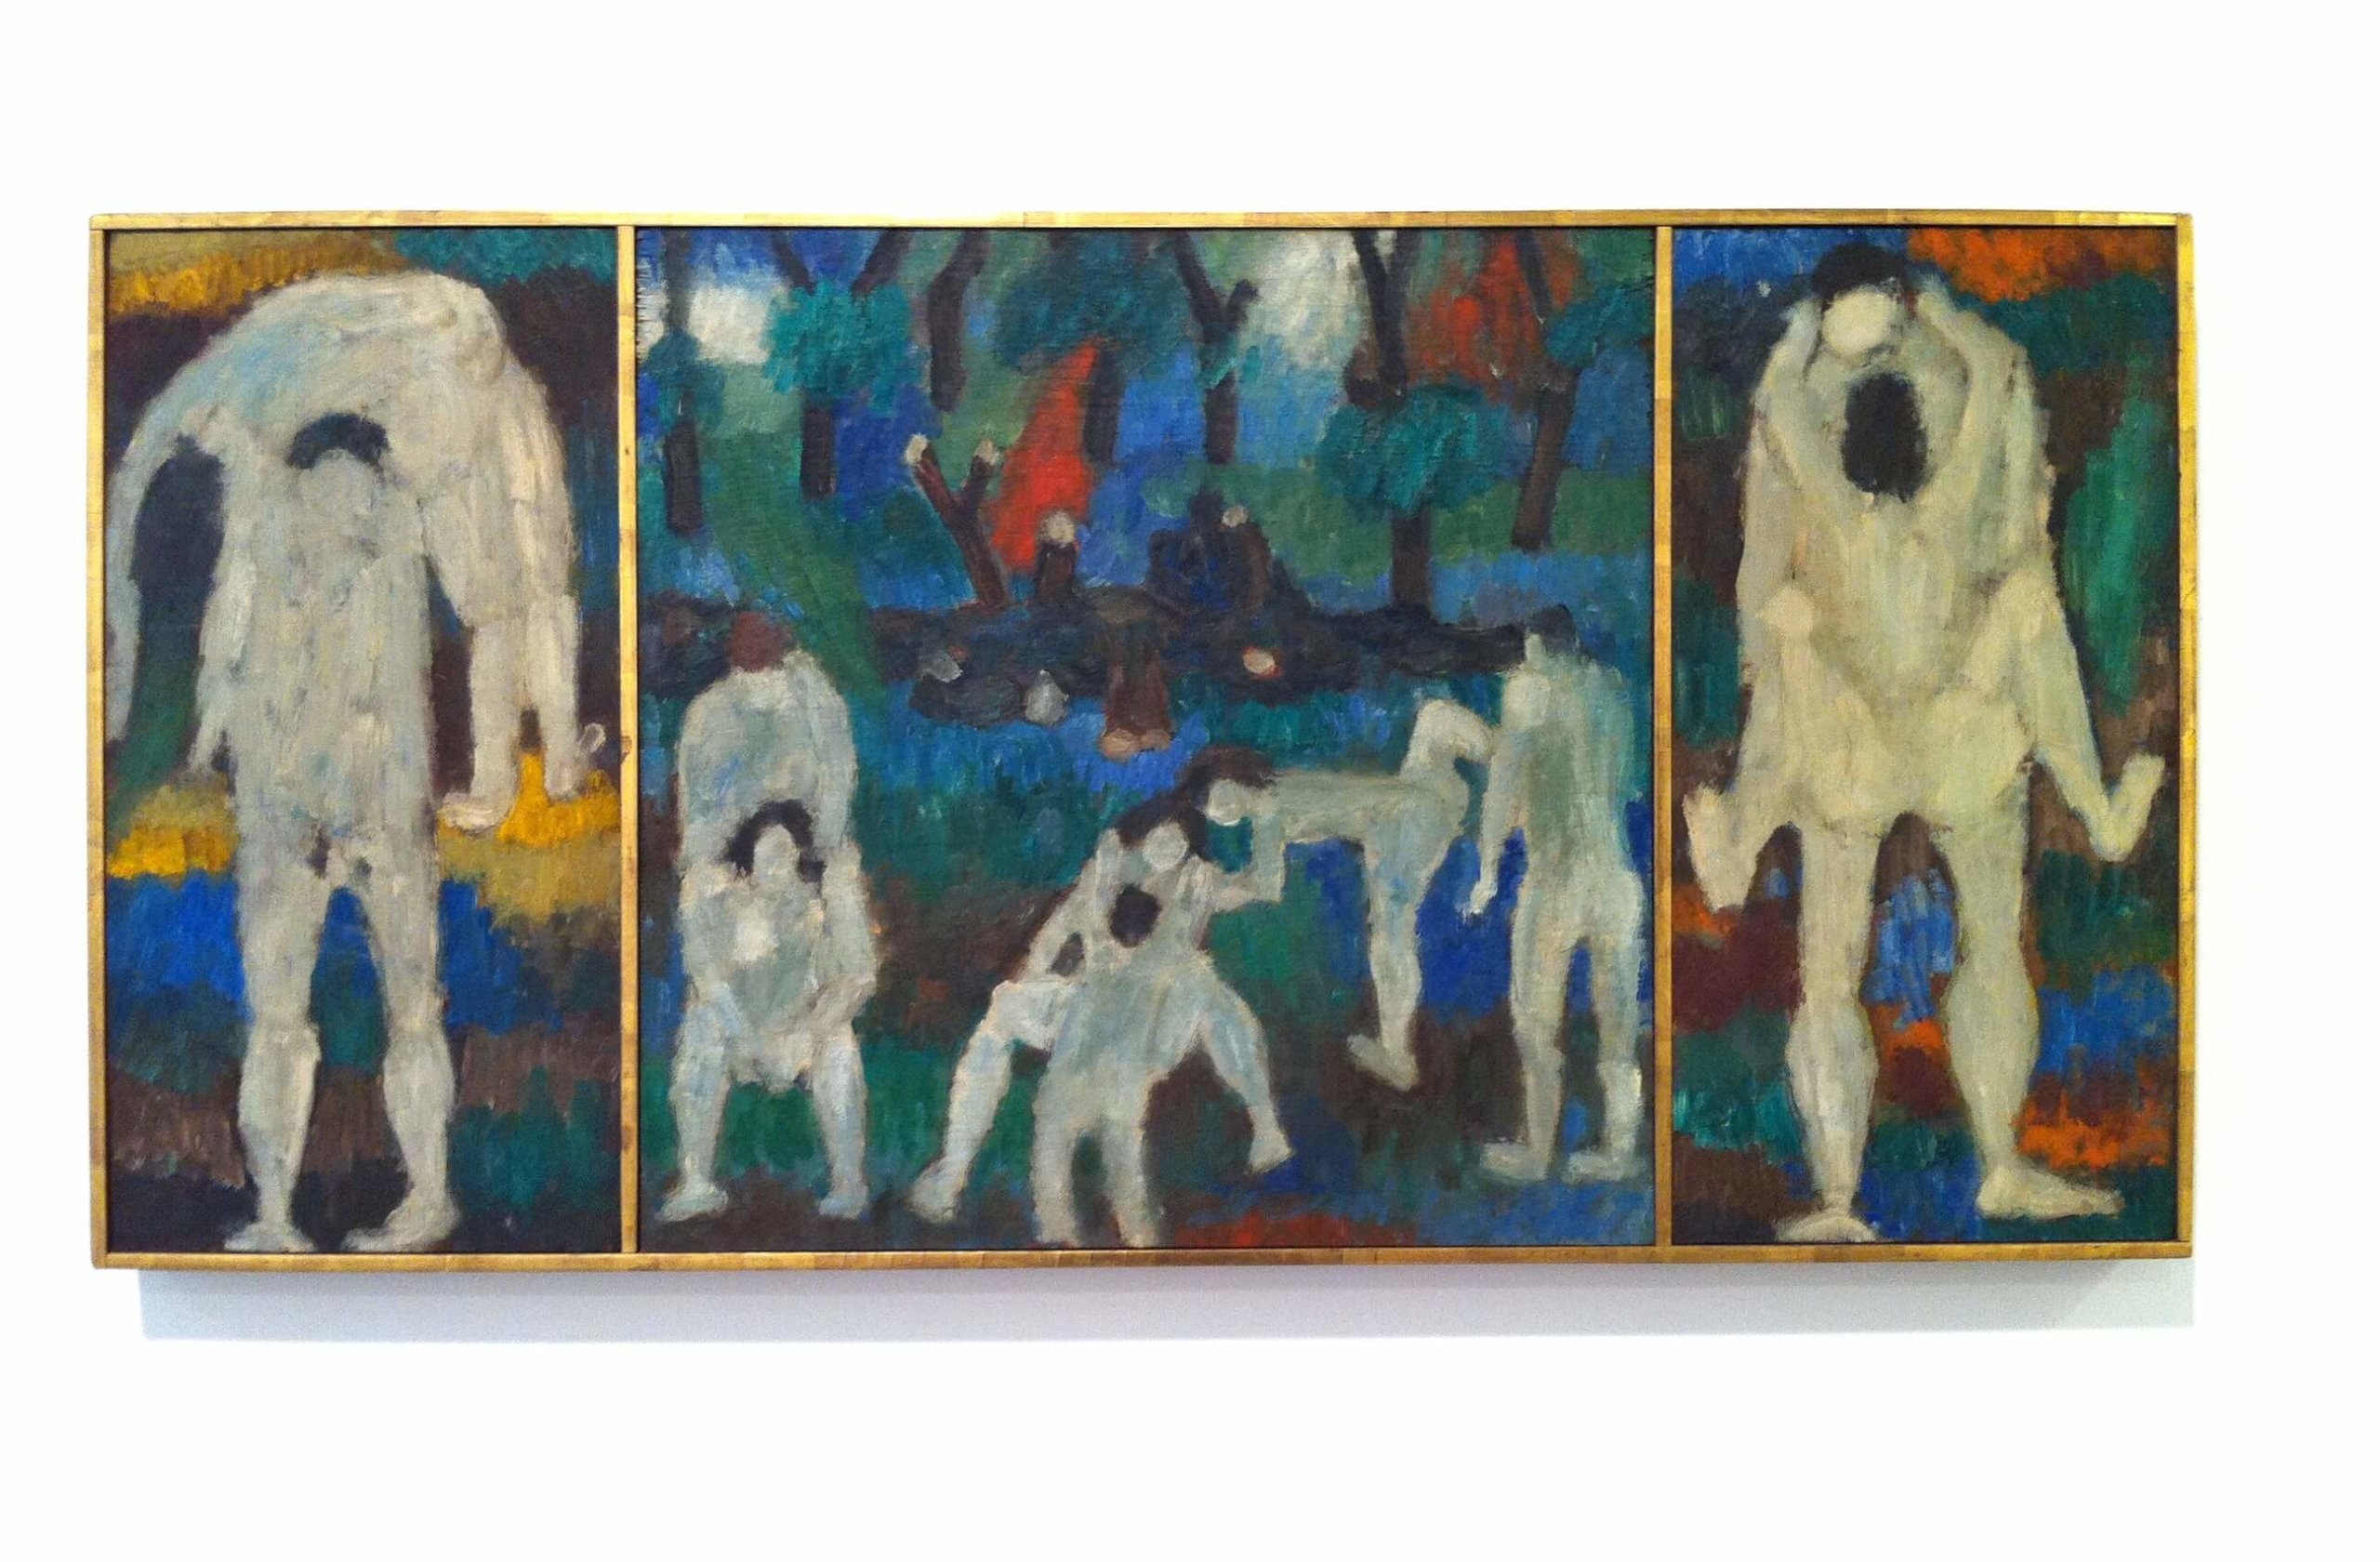 Jan Müller, Bacchanale Triptych, c. 1955-56, oil on panel (3 Parts), 17 3/4 x 36 1/4 inches (courtesy Lori Bookstein Fine Art)